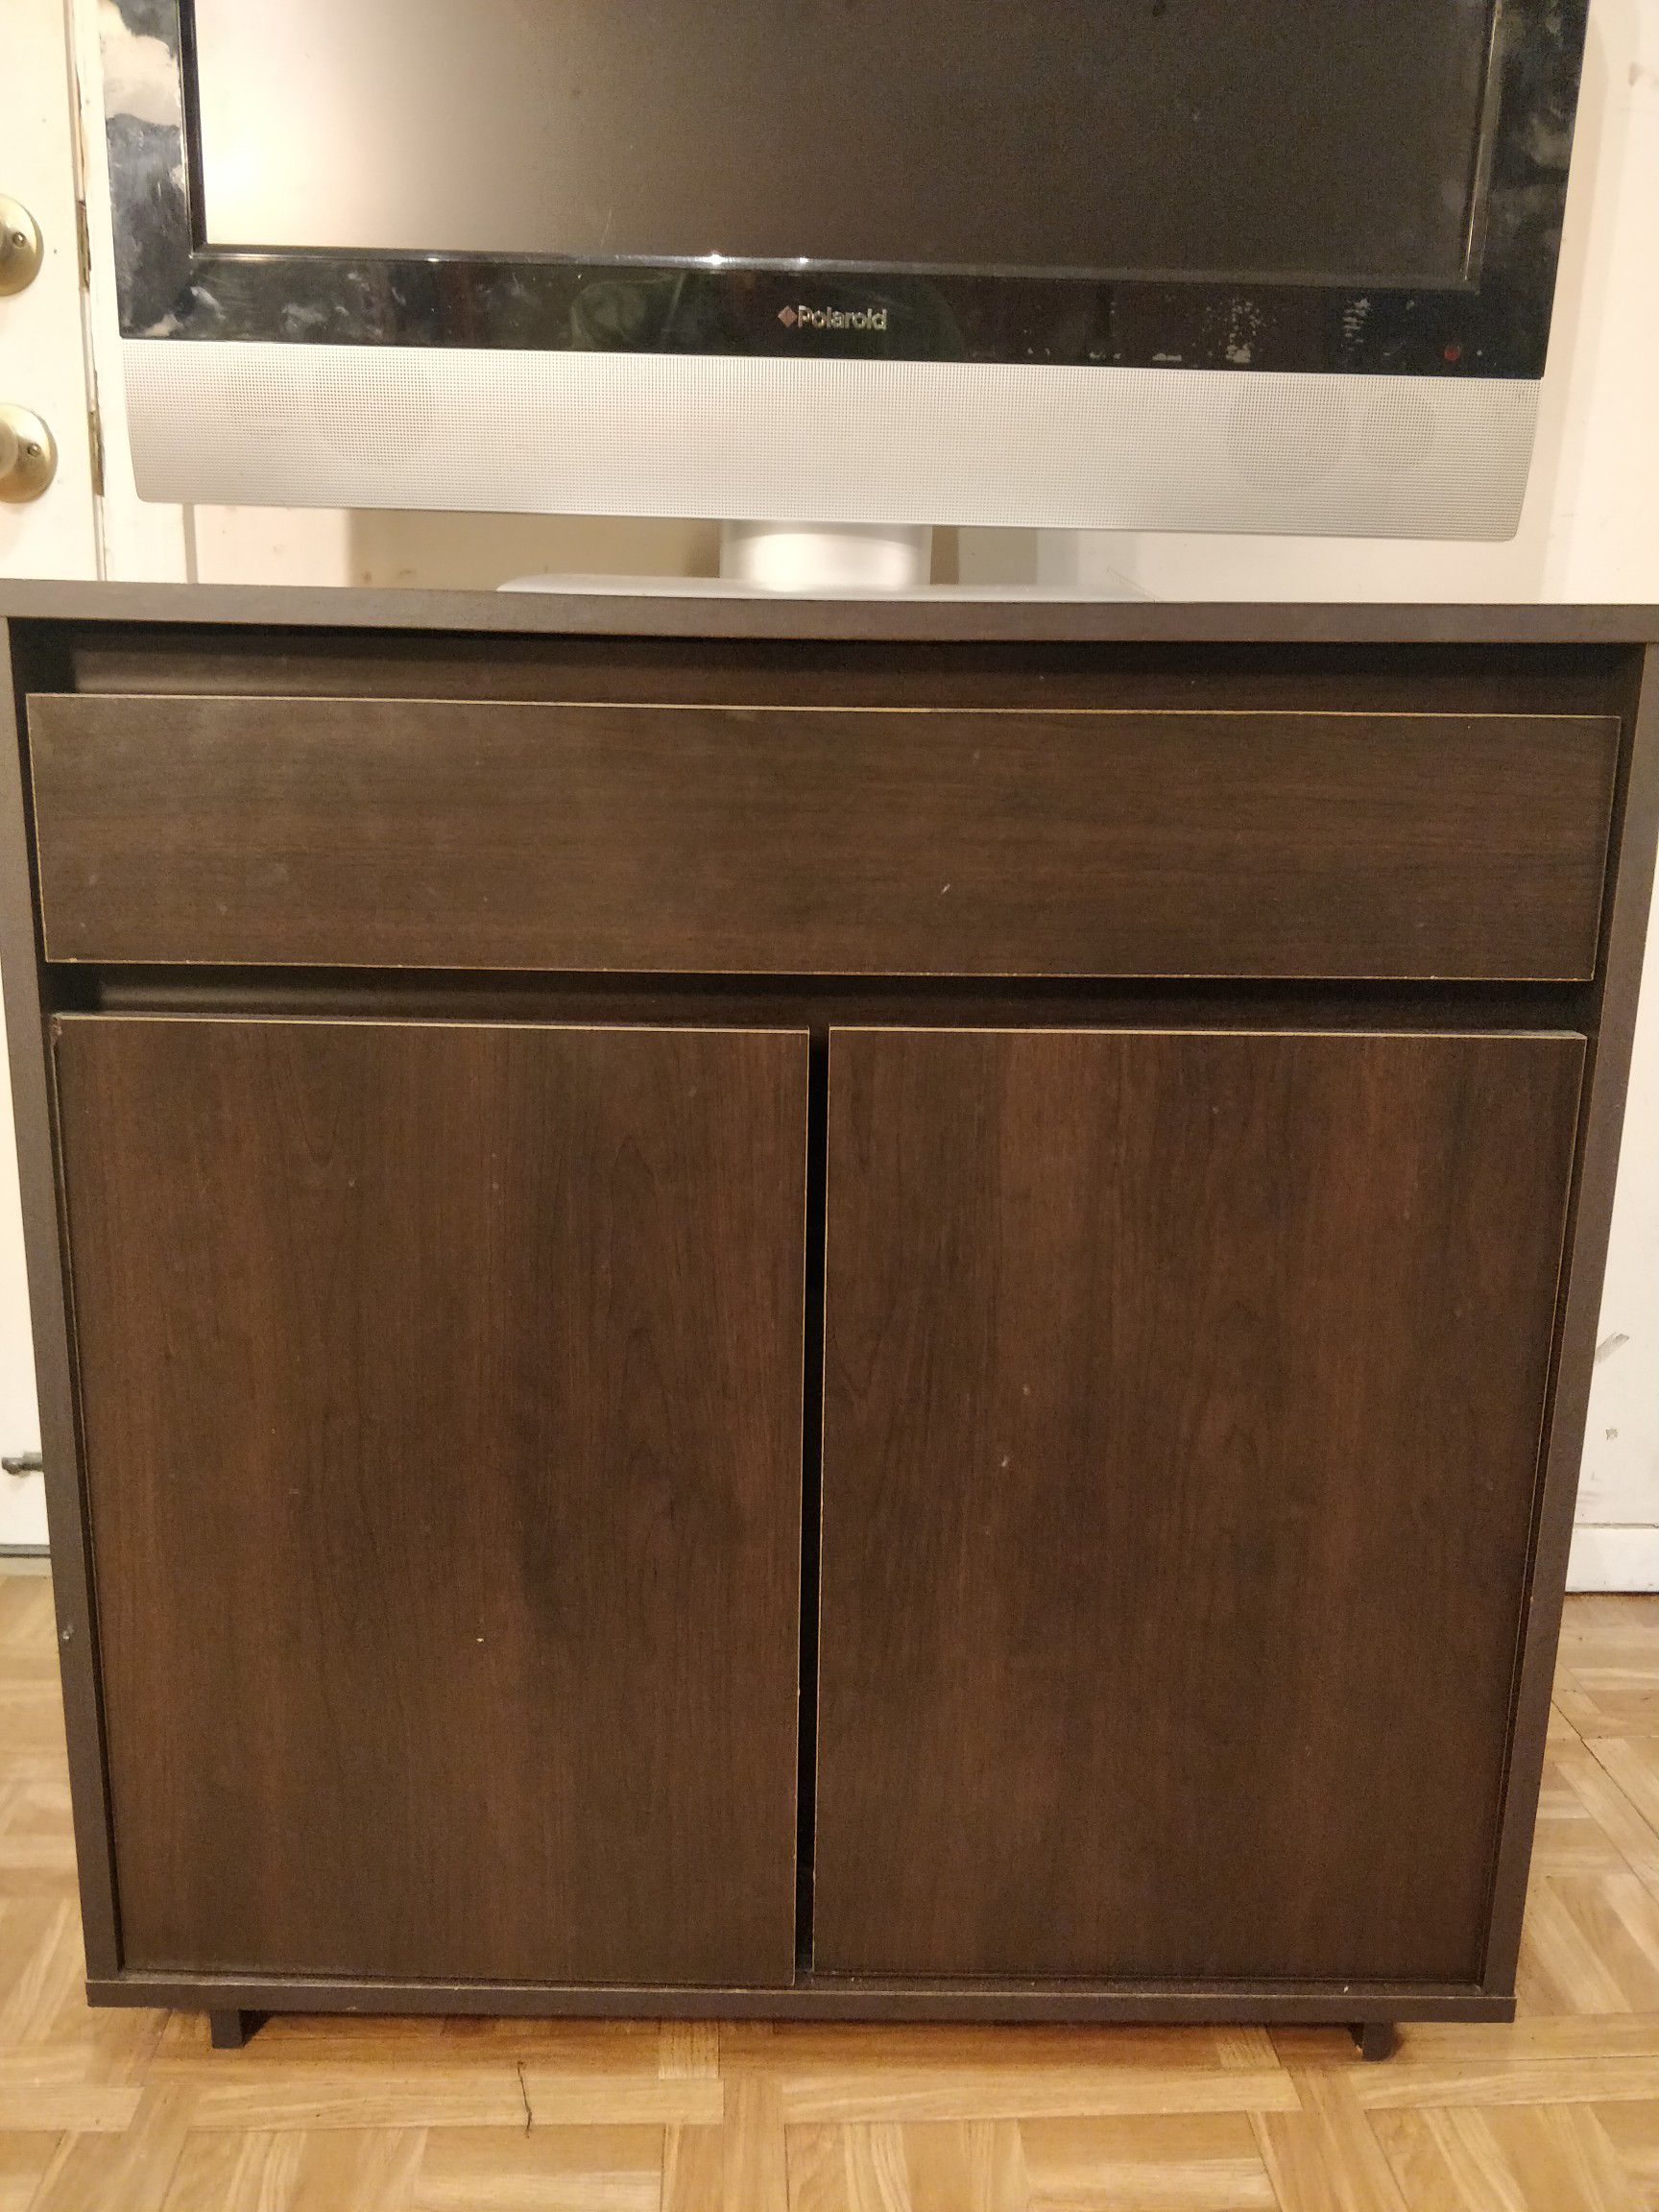 Nice TV stand/ cabinet with big drawer and shelves in good condition. L29.5"W19.5"H30"